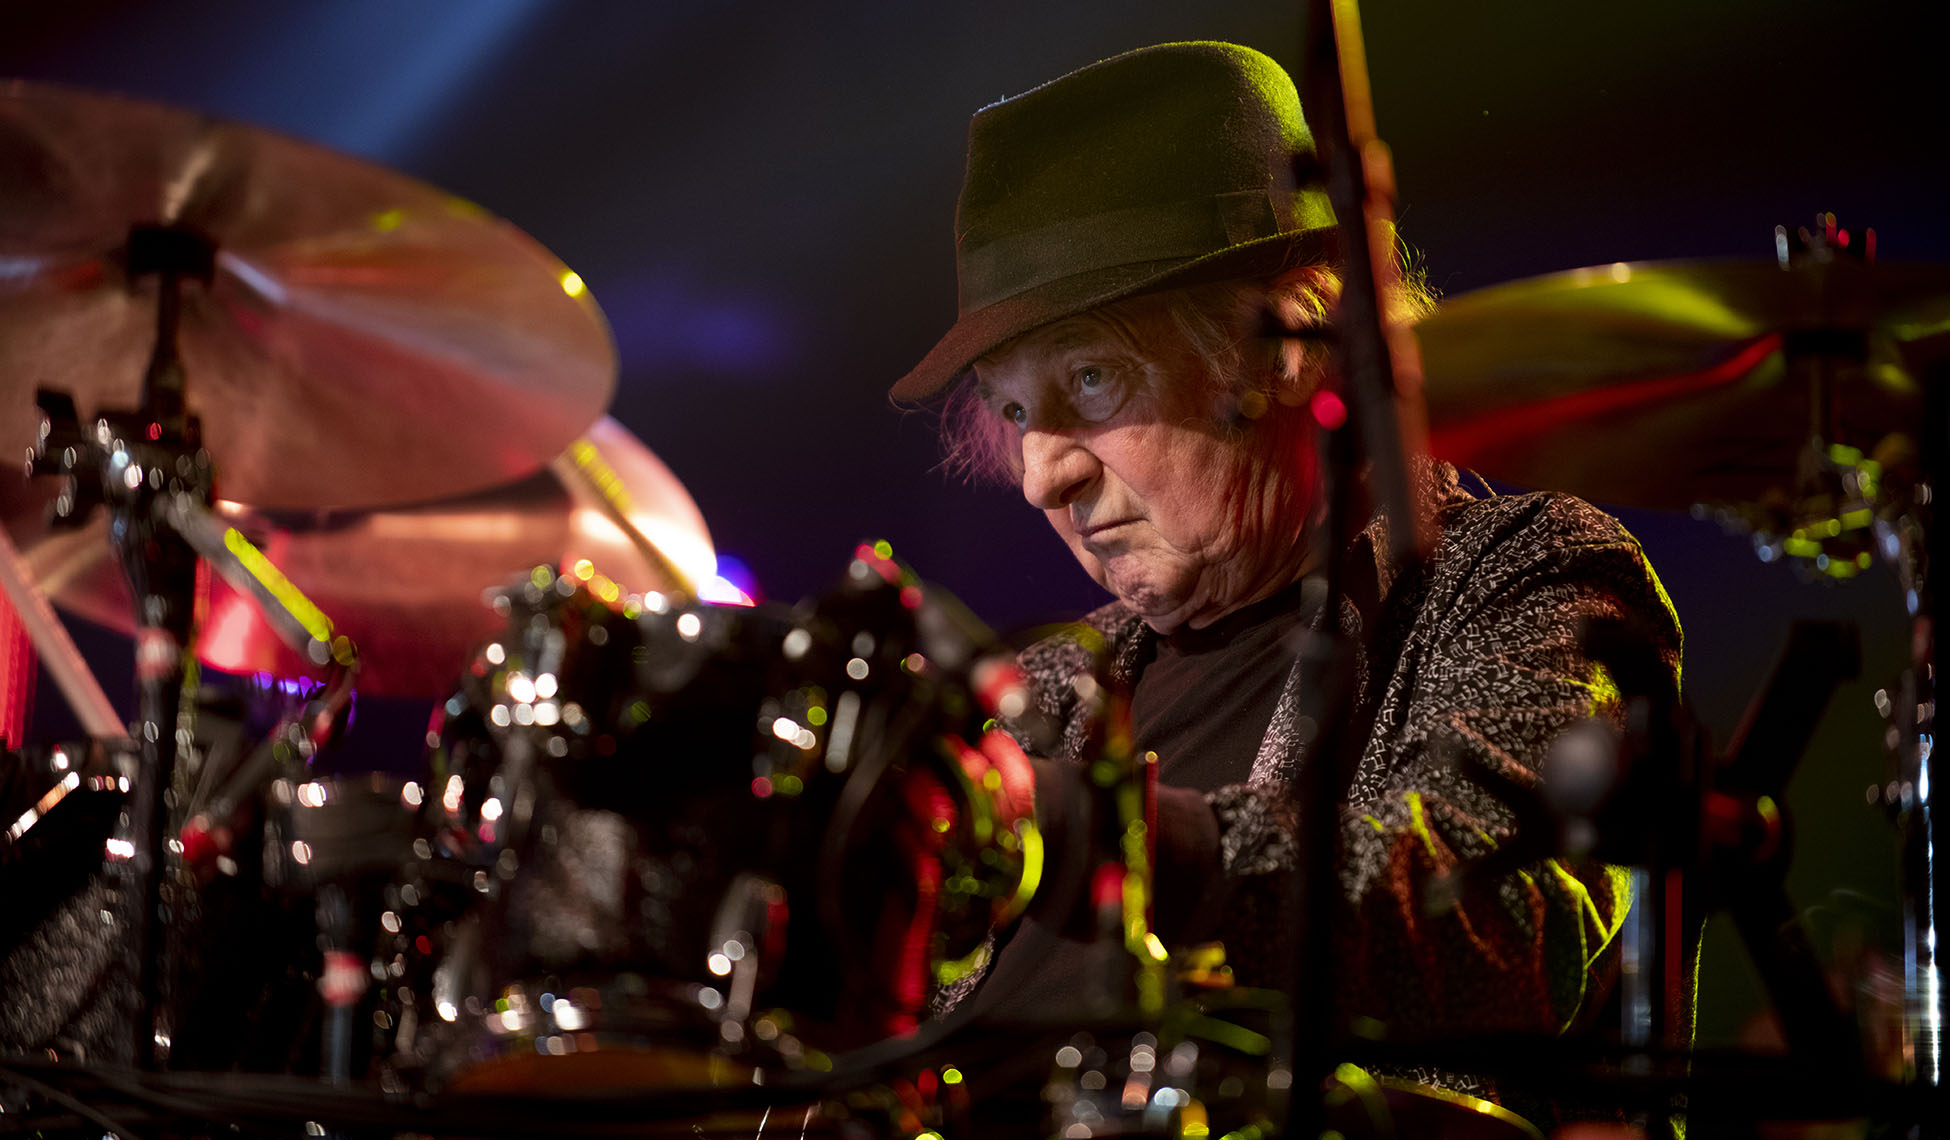 Alan White, Drummer of Yes